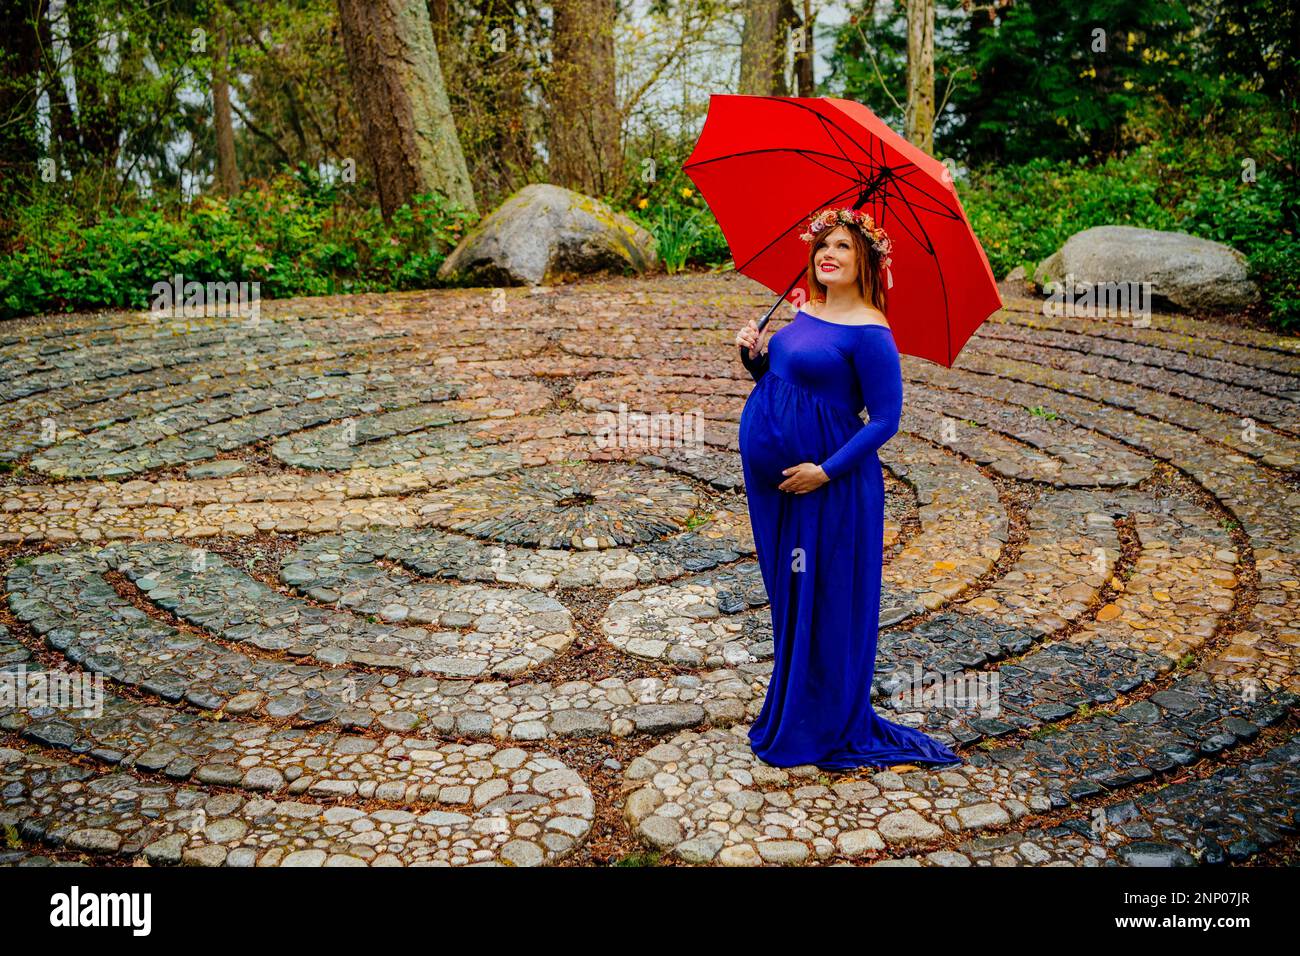 Pregnant women in blue dress in front of stone labyrinth with red umbrella Stock Photo